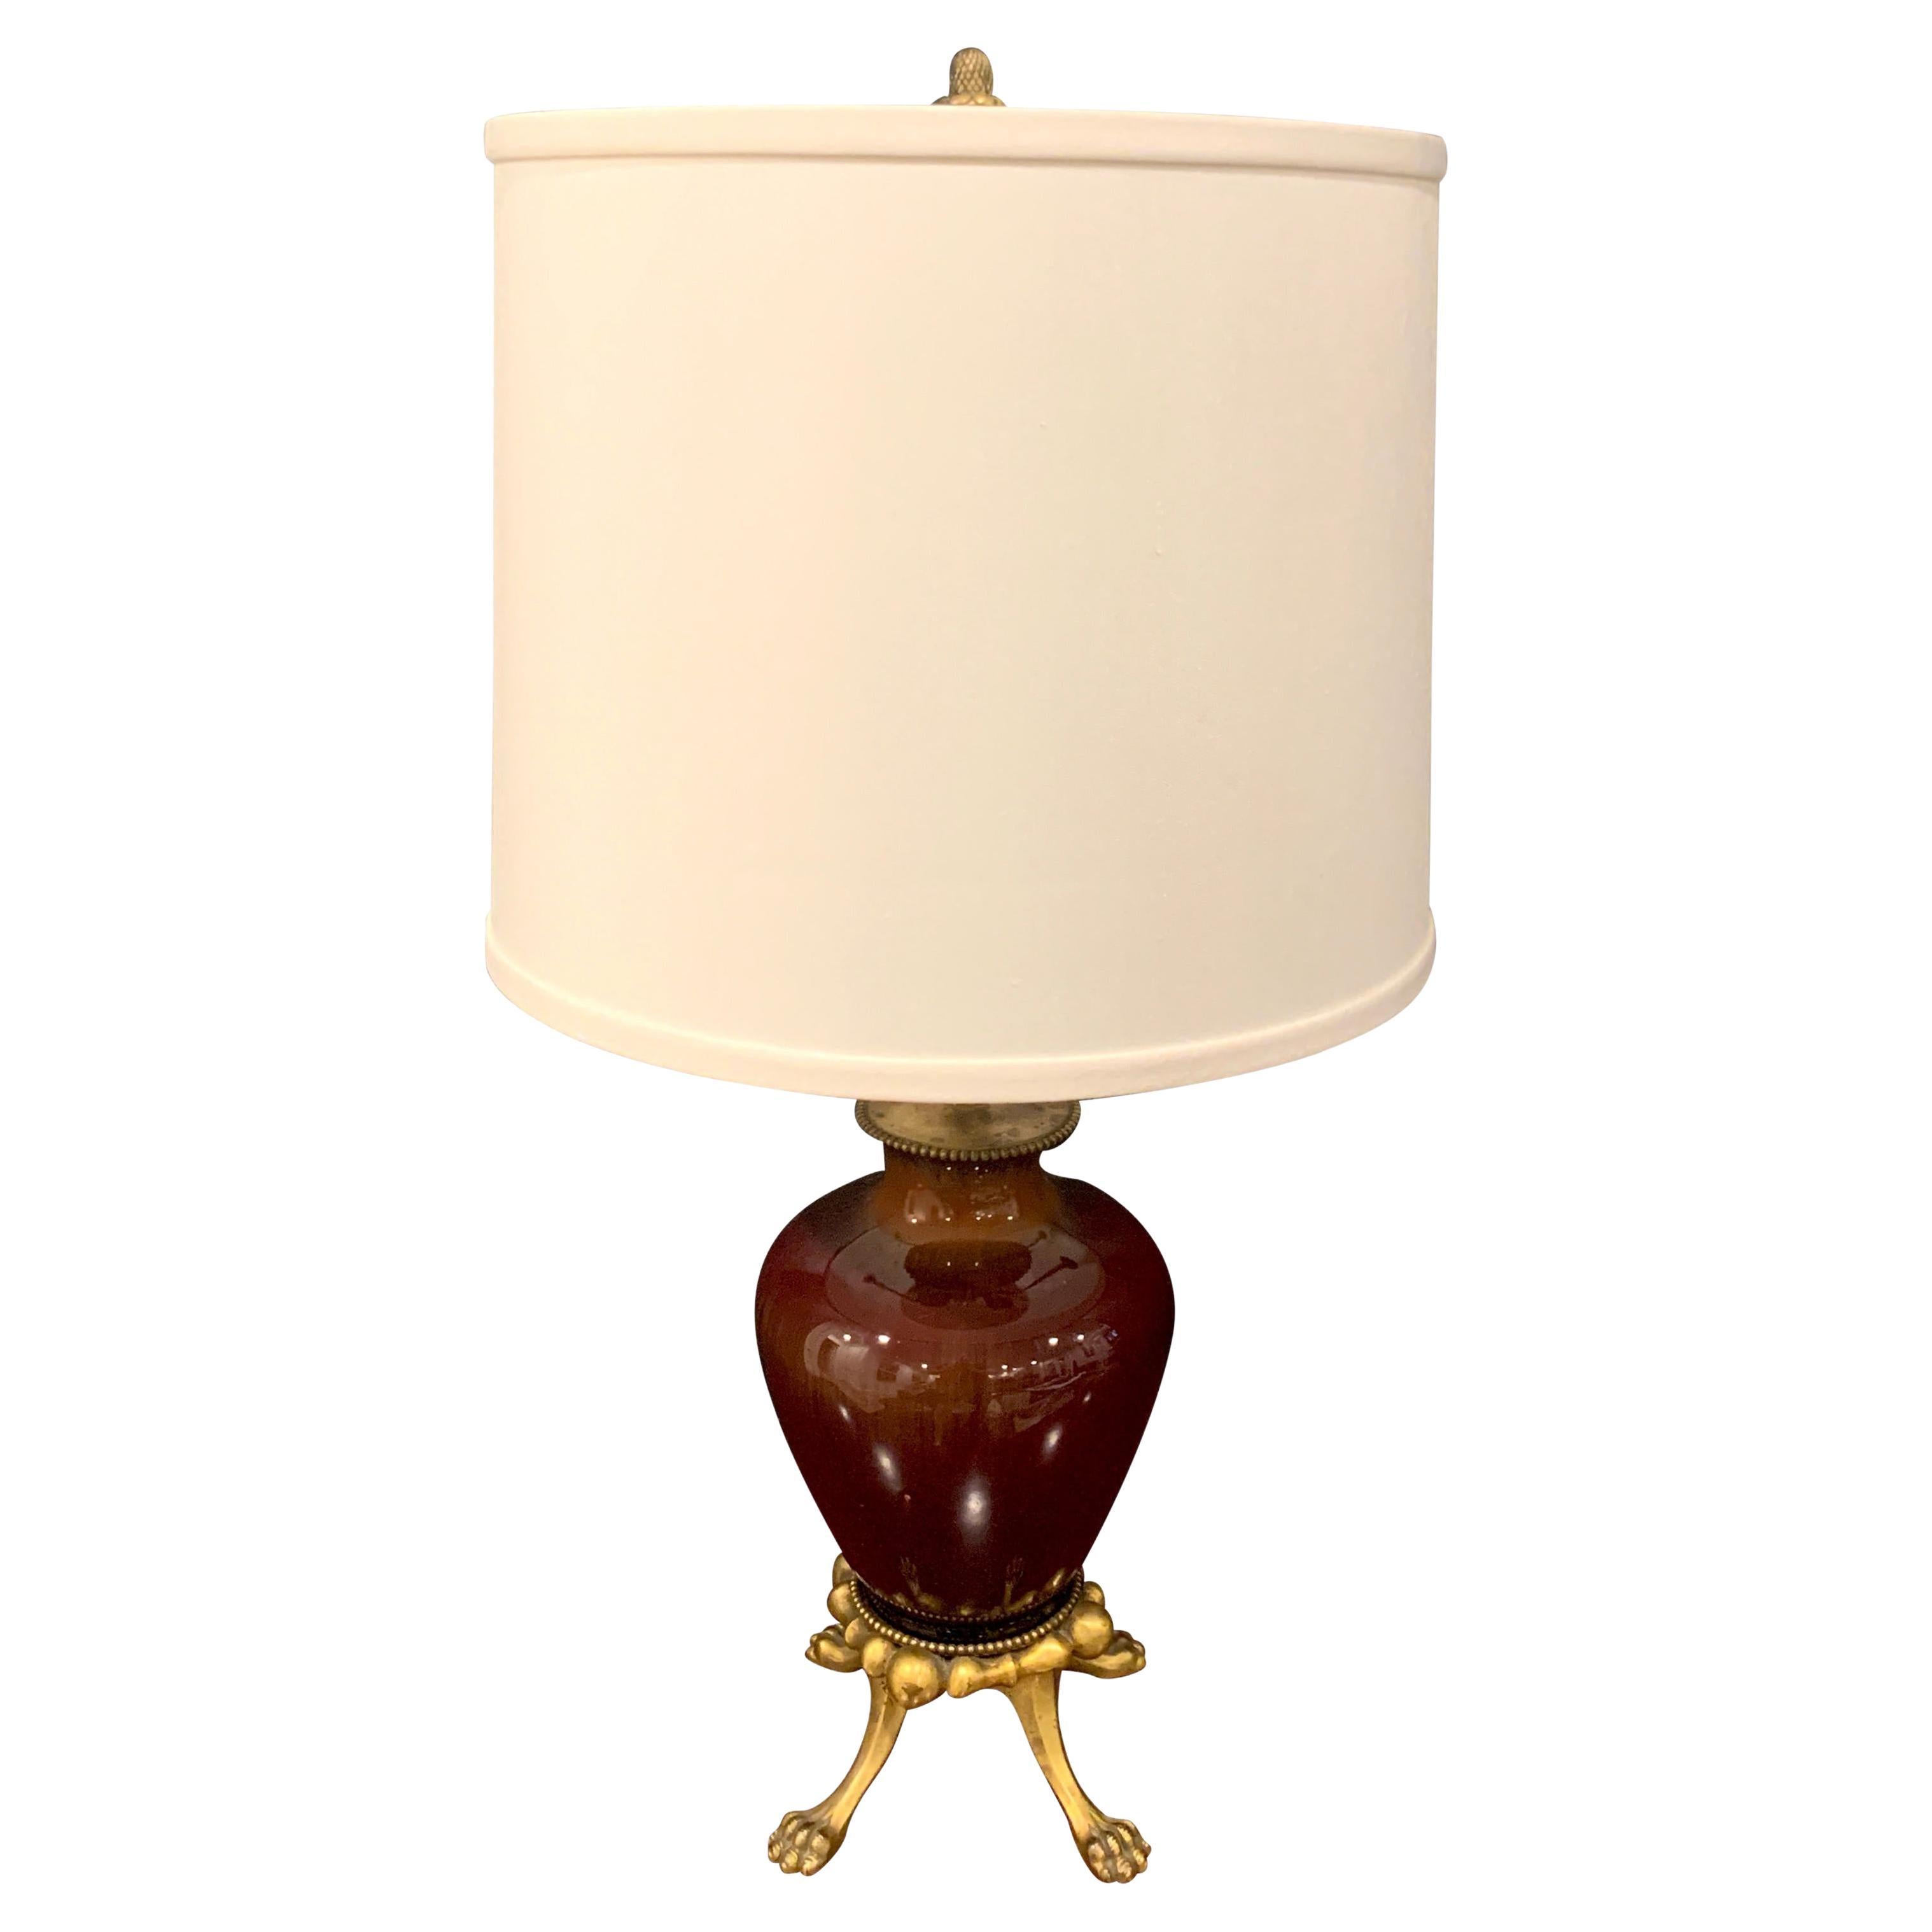 Sang De Boeuf, Ormolu Mounted Vase, by Rookwood 1936, Now as a Lamp, Dark Glaze For Sale